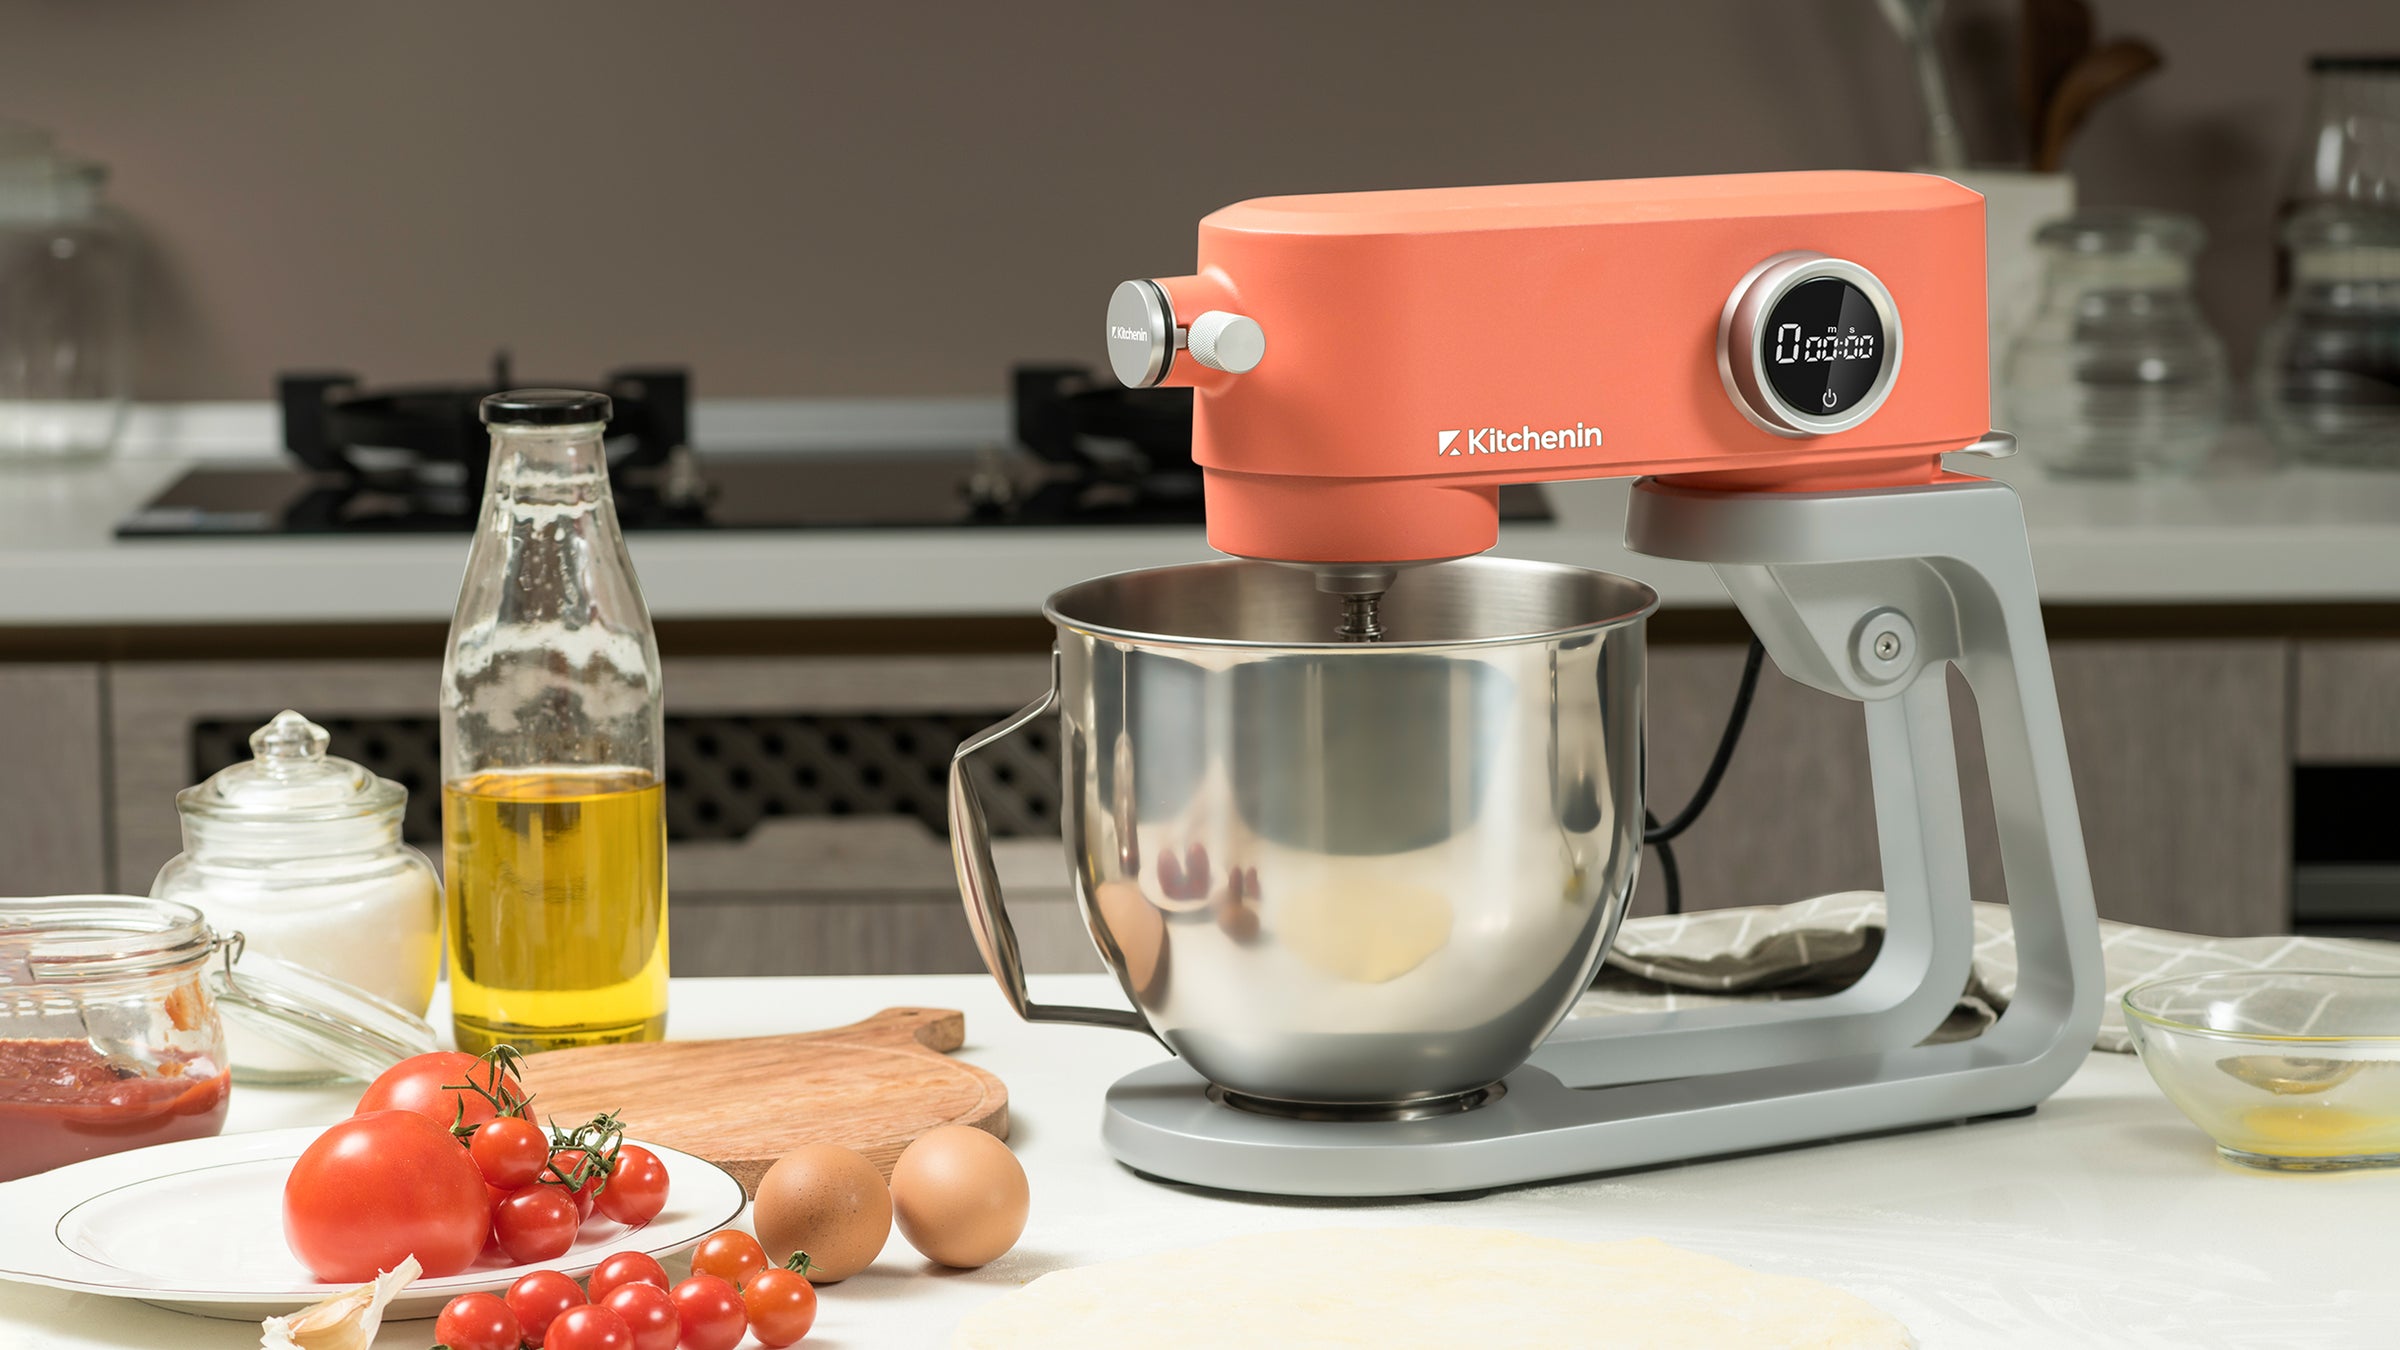 .com: Howork: Large Capacity Stand Mixer